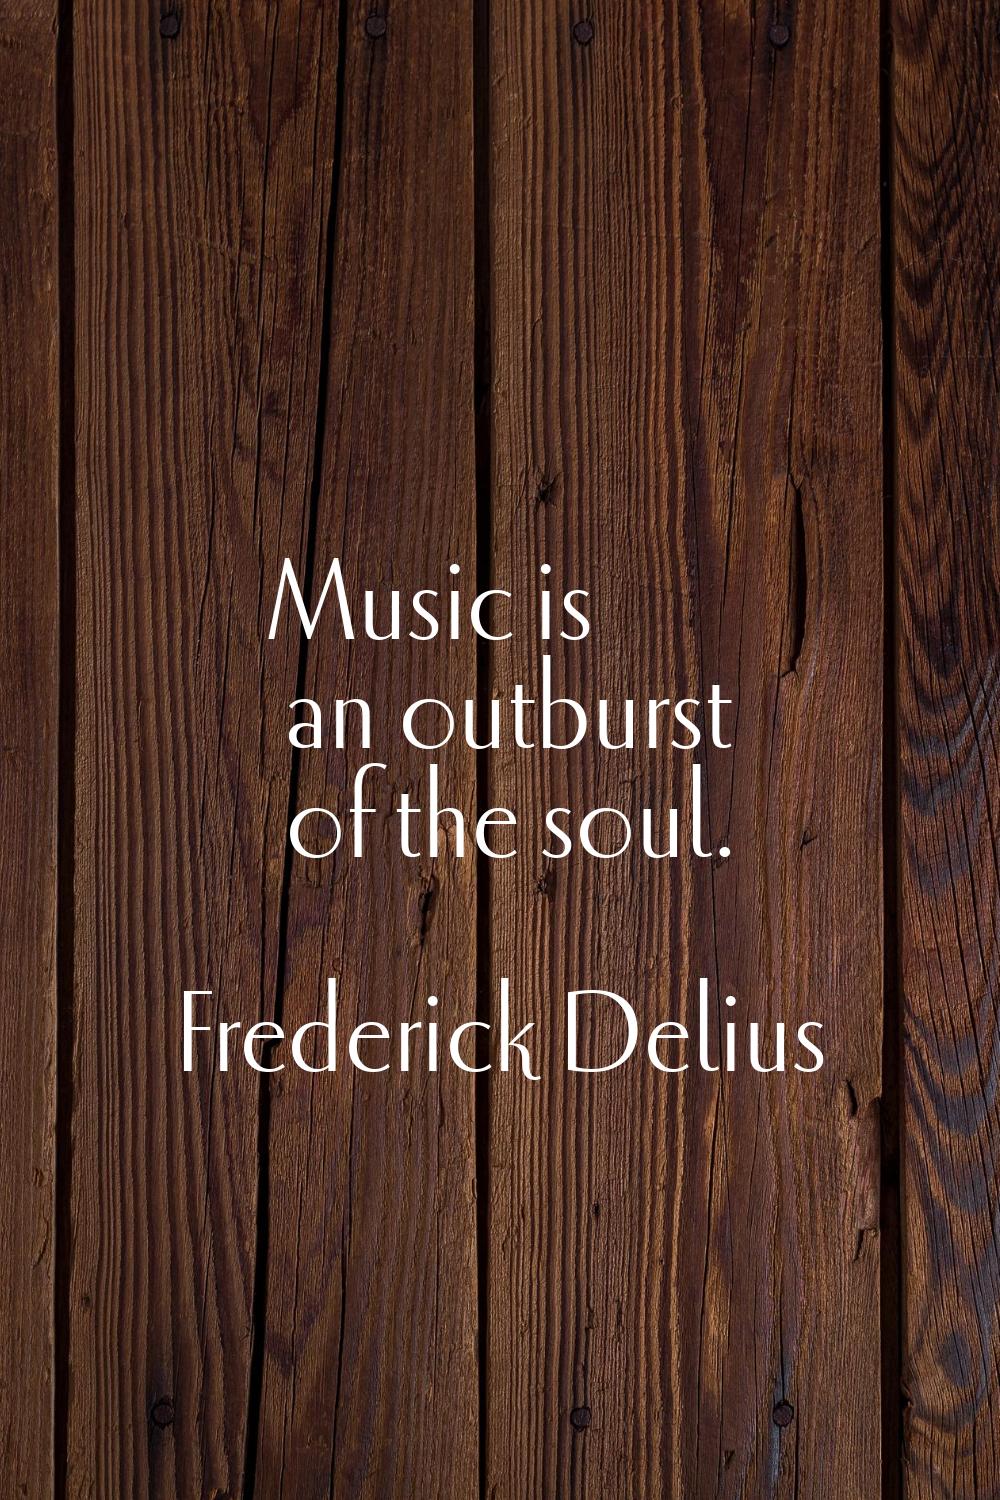 Music is an outburst of the soul.